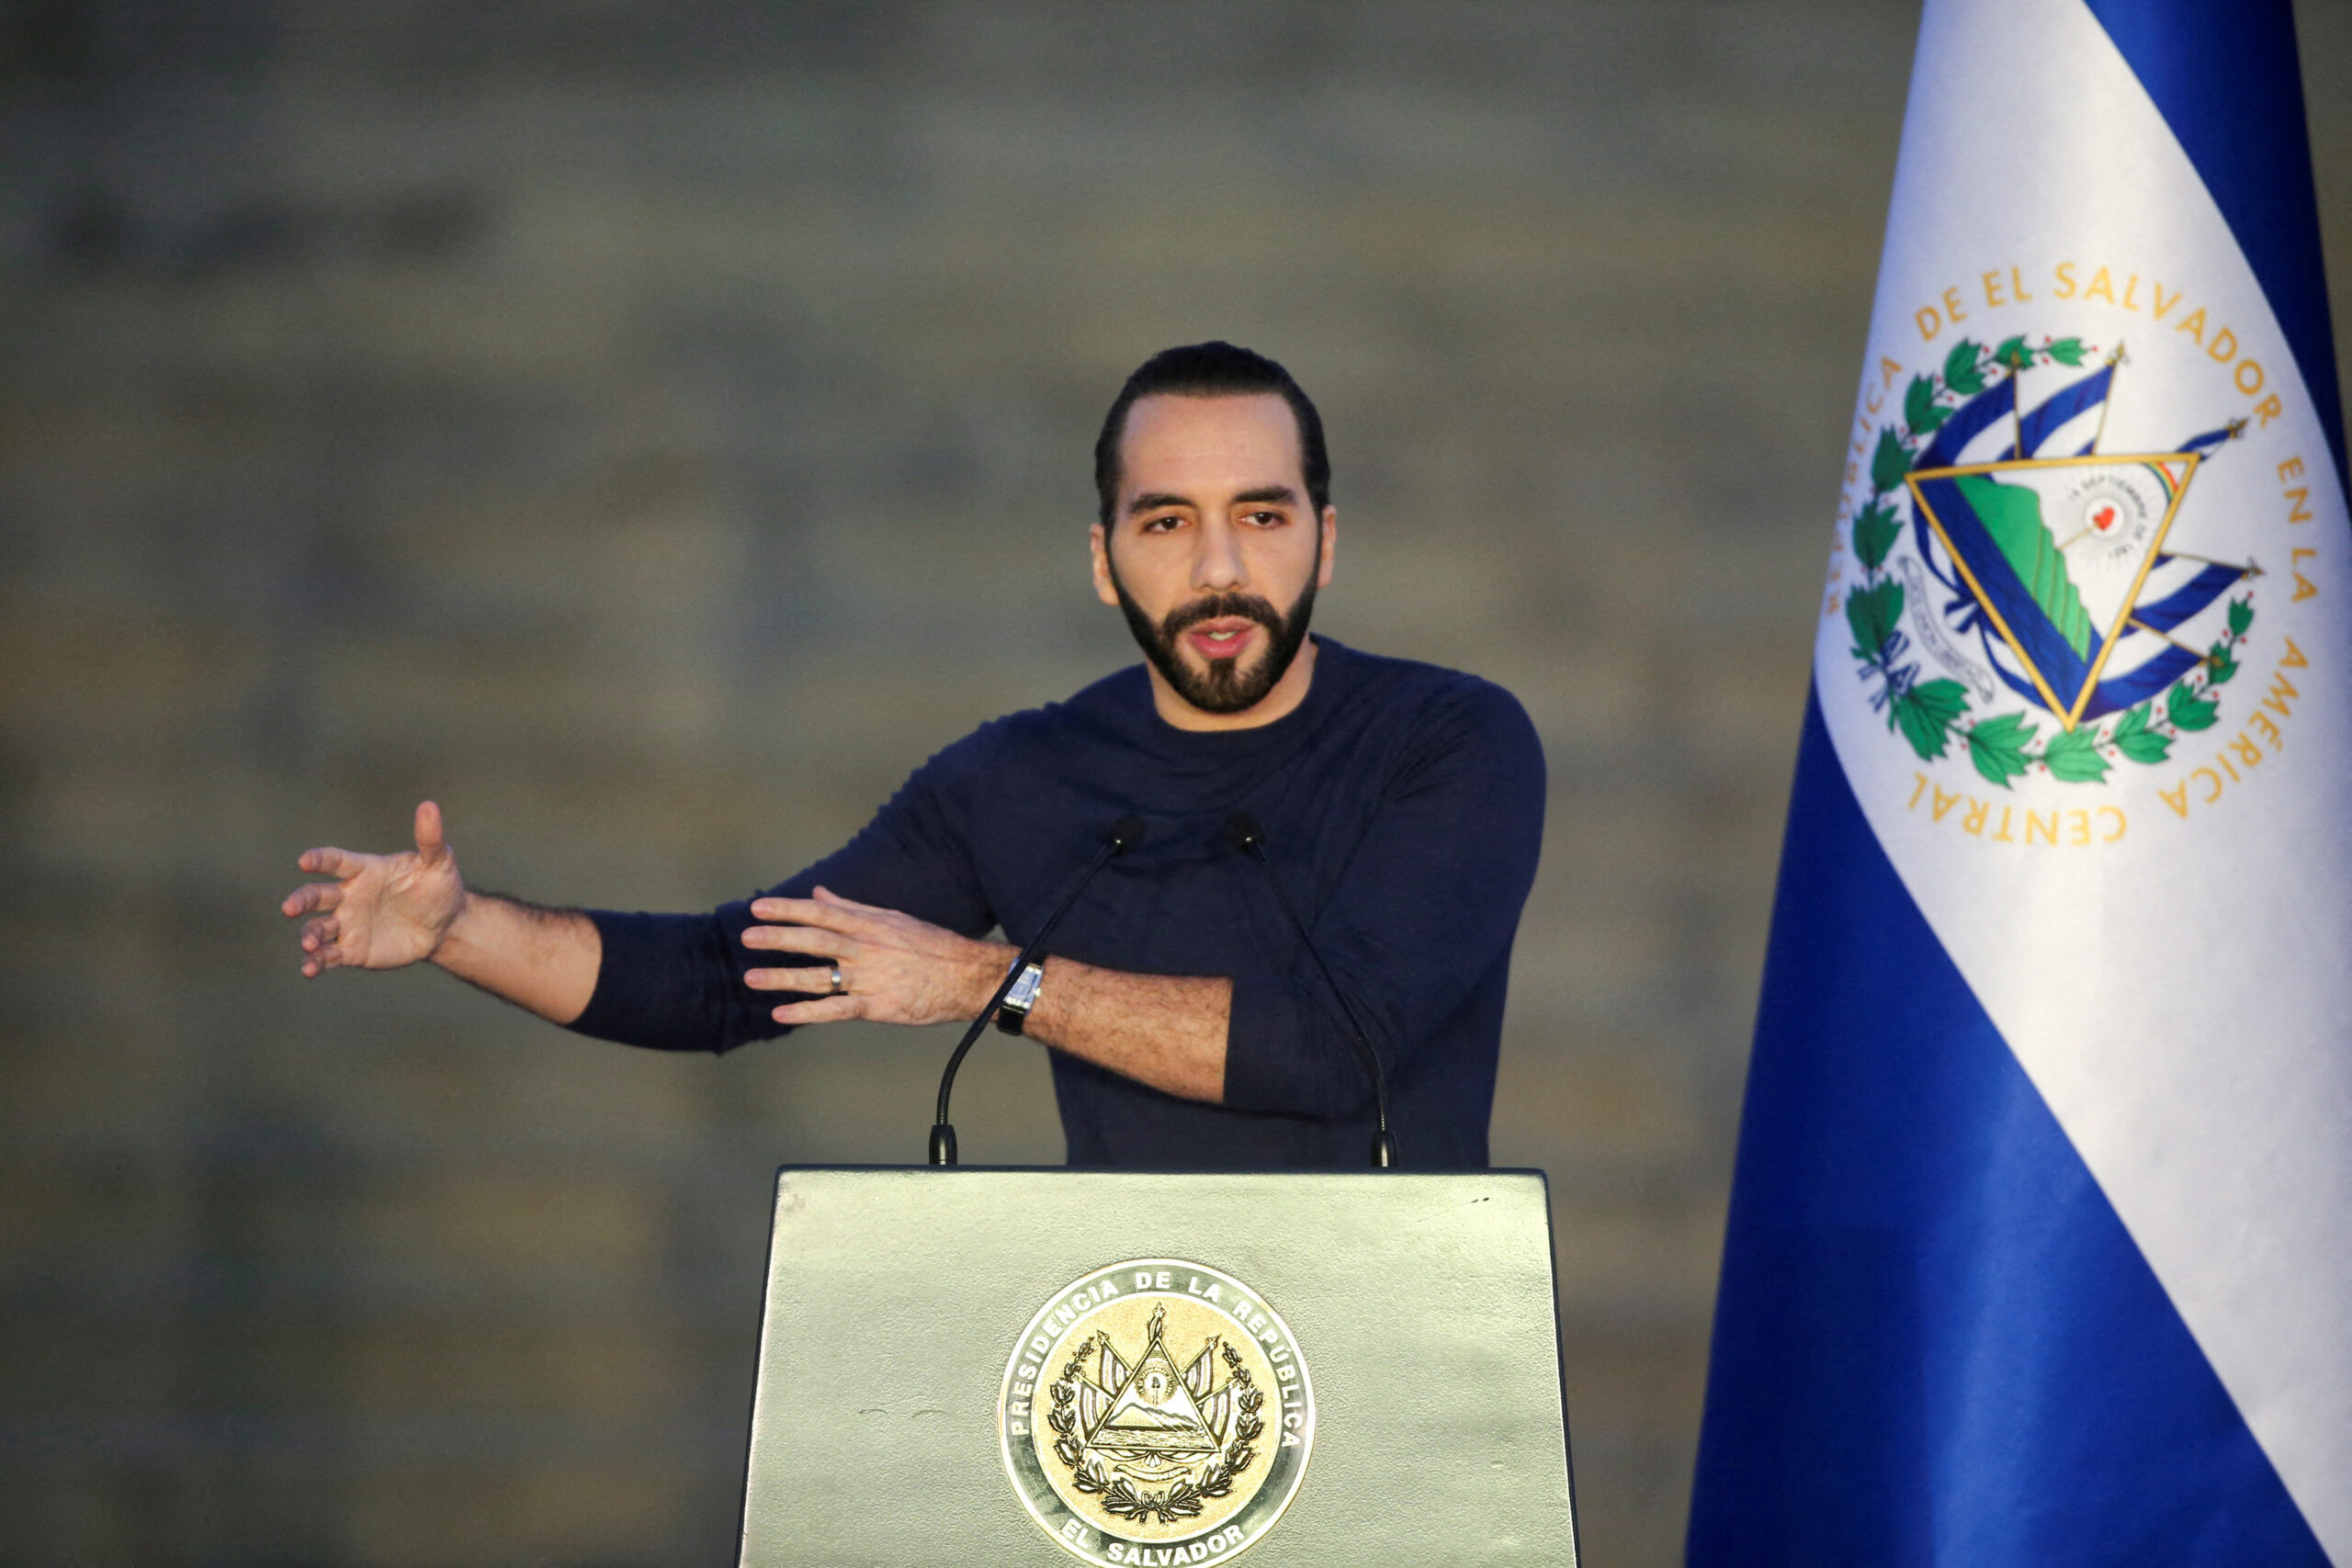 El Salvador’s Bukele heads for reelection amid human rights concerns